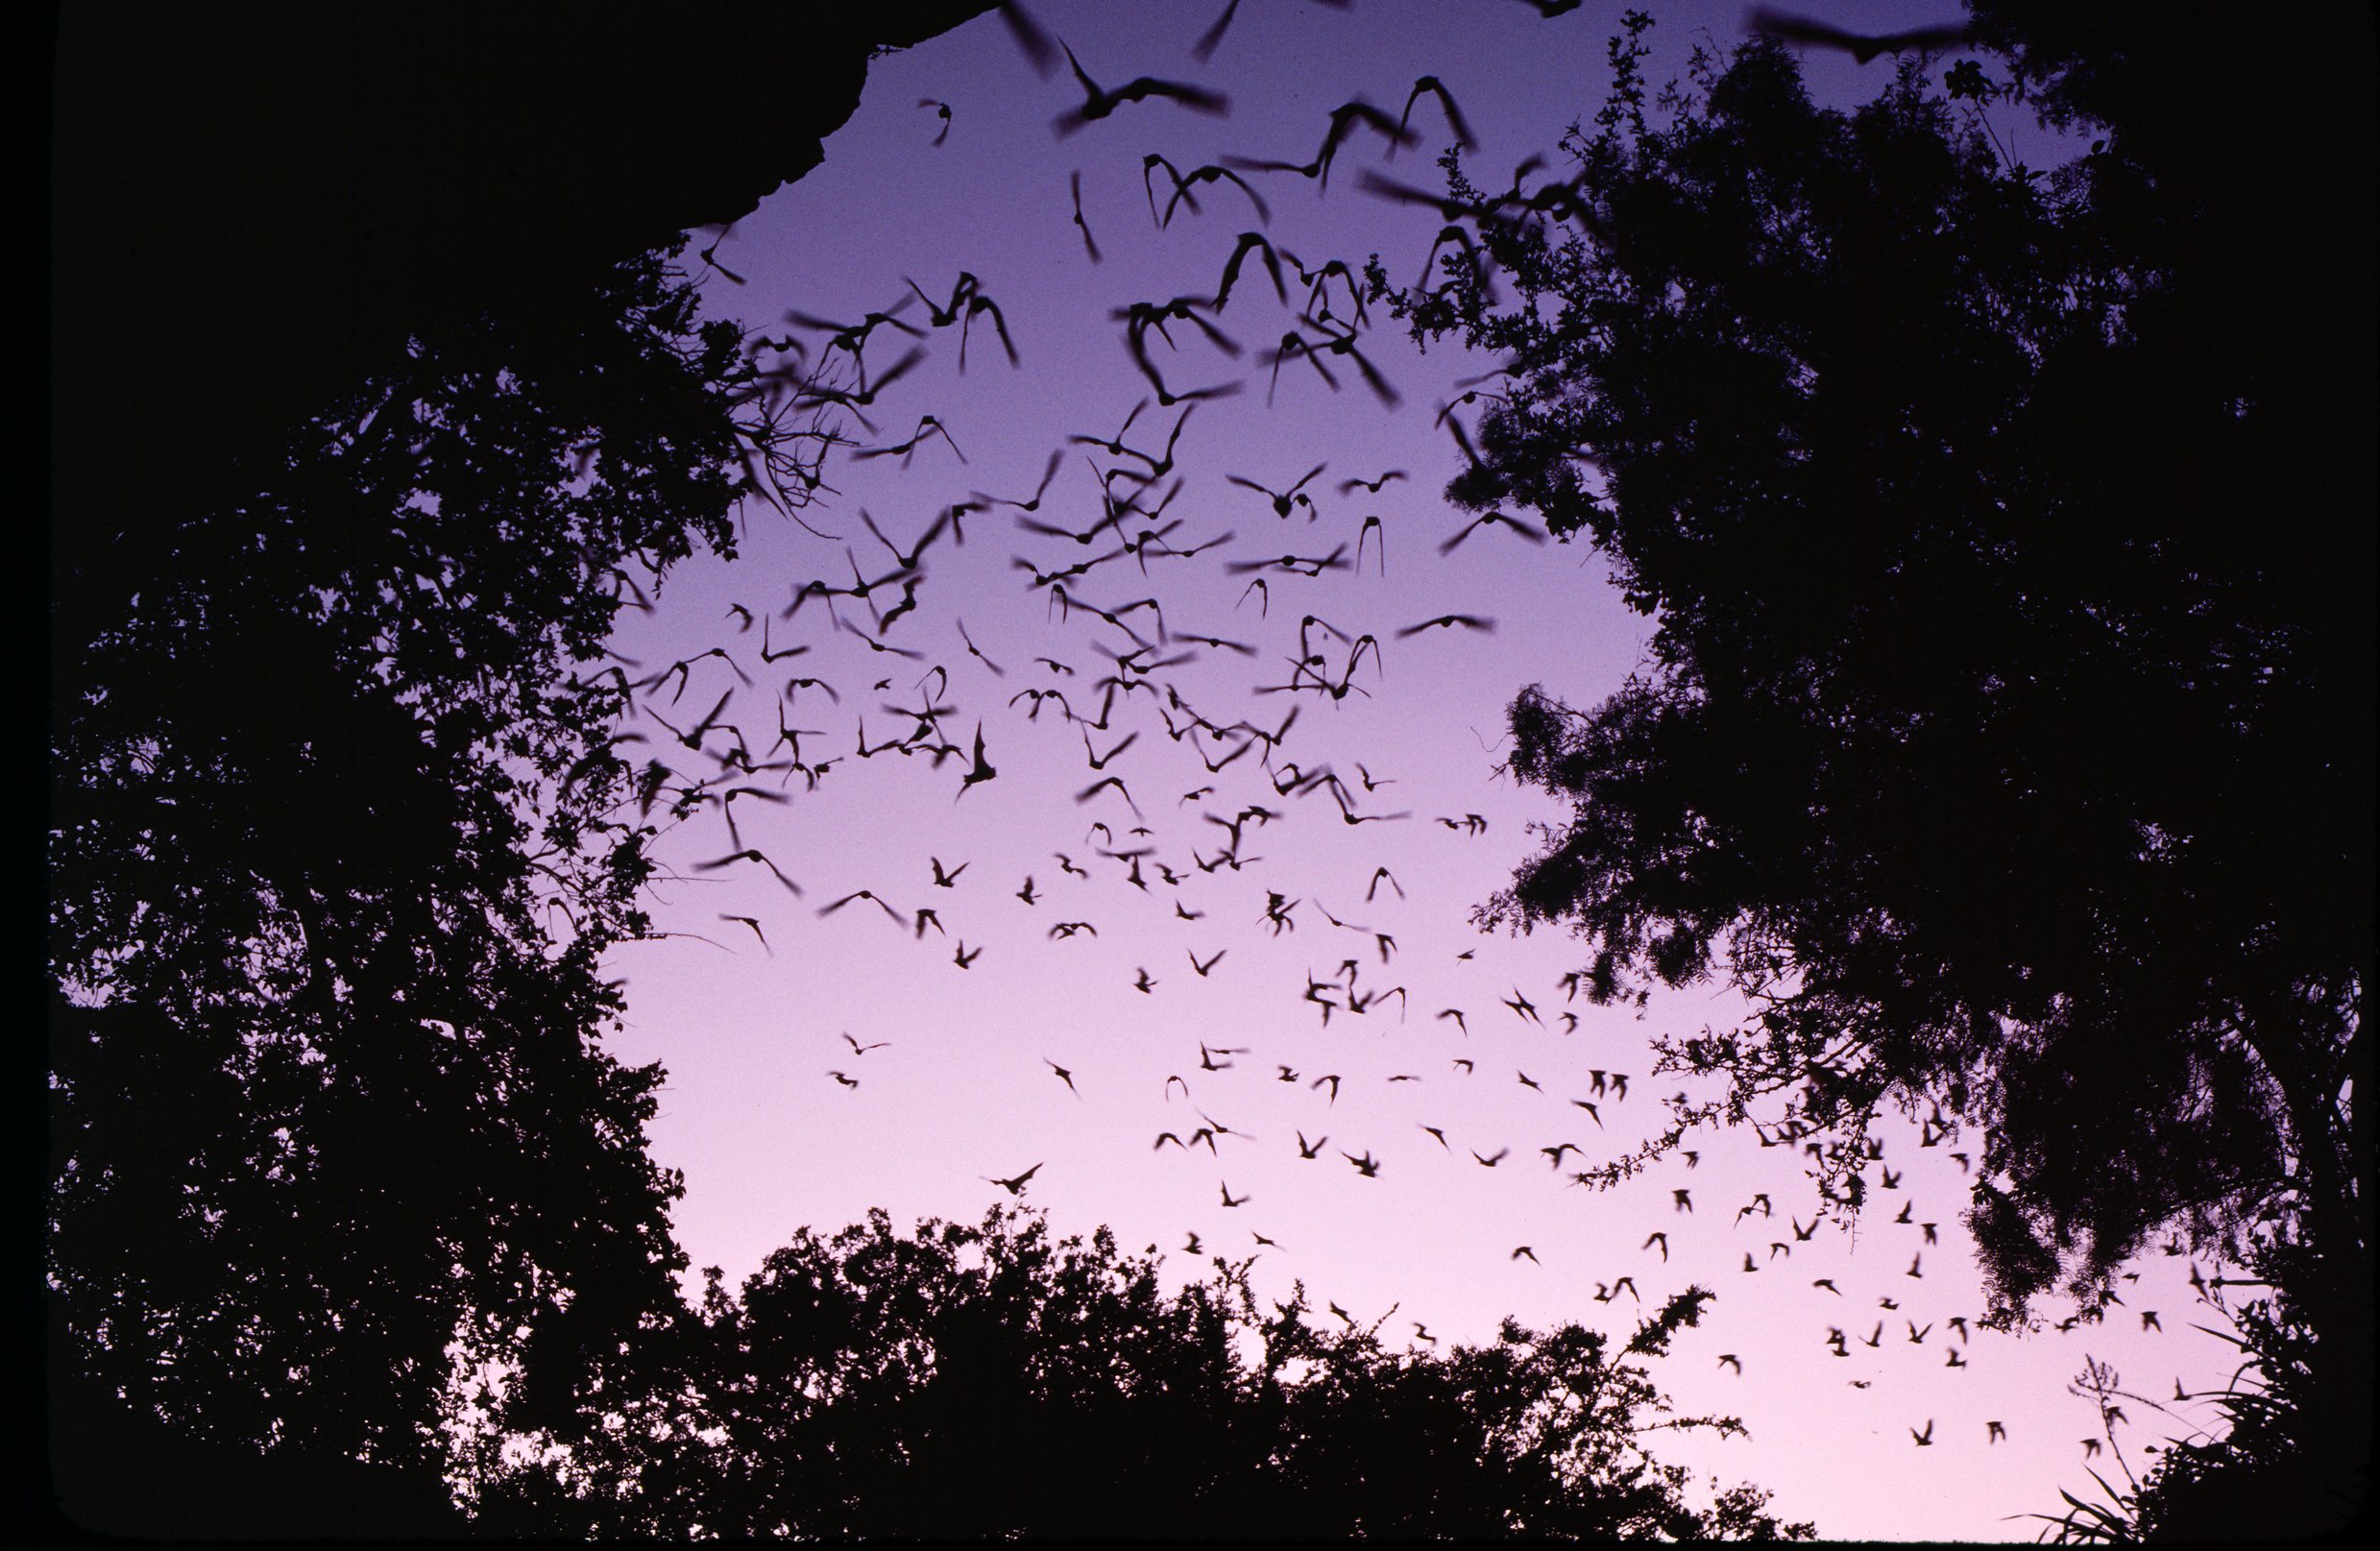 A cloud of bats fly in a whirlwind of leathery wings among a set of trees as they emerge from a cave, with a purple sunset sky behind them.